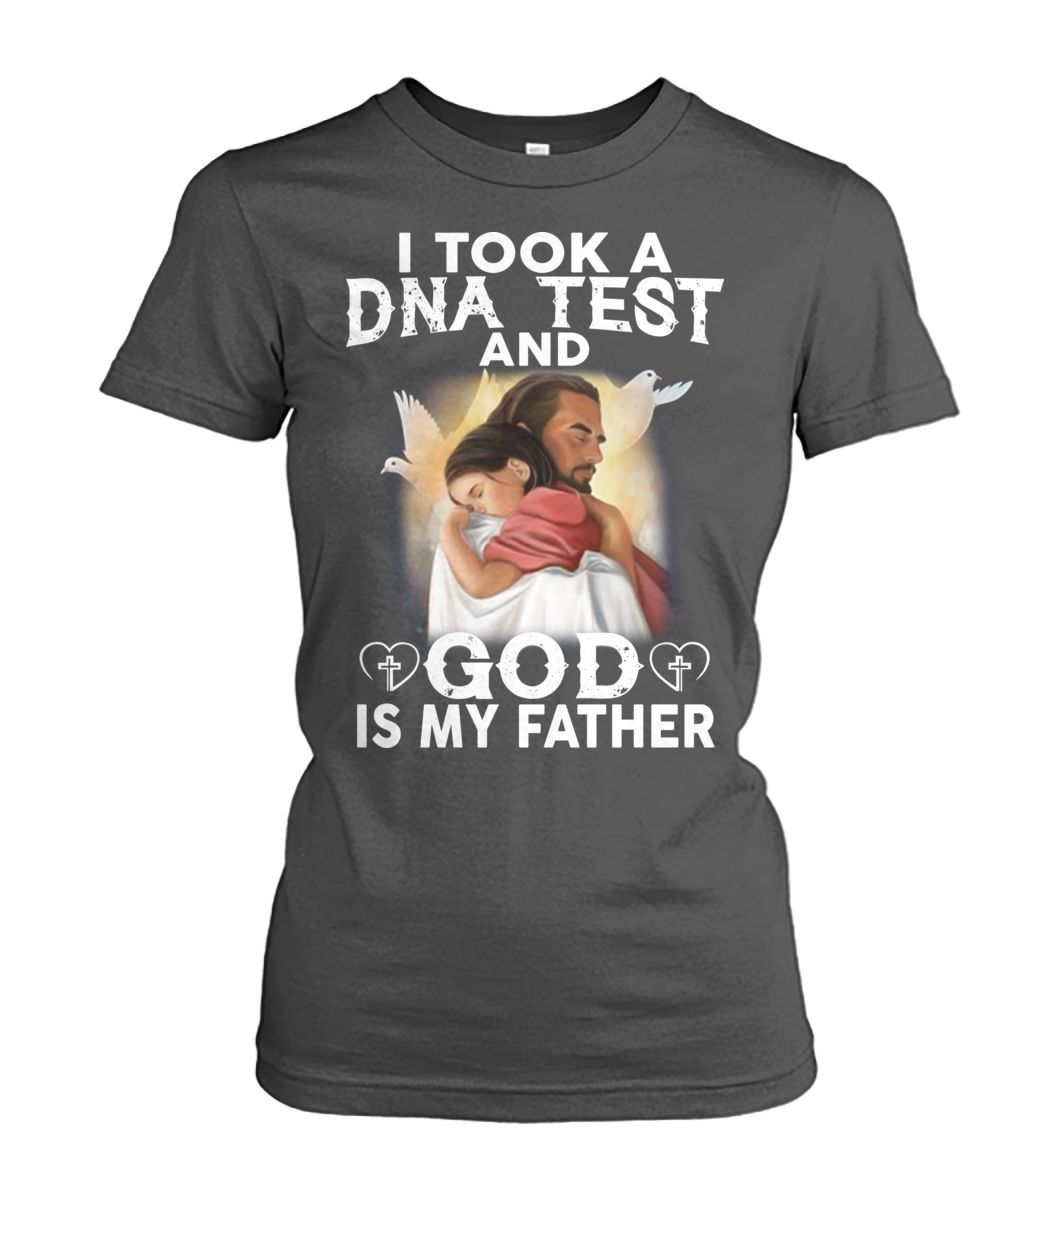 I took a dna test and god is my father women's crew tee